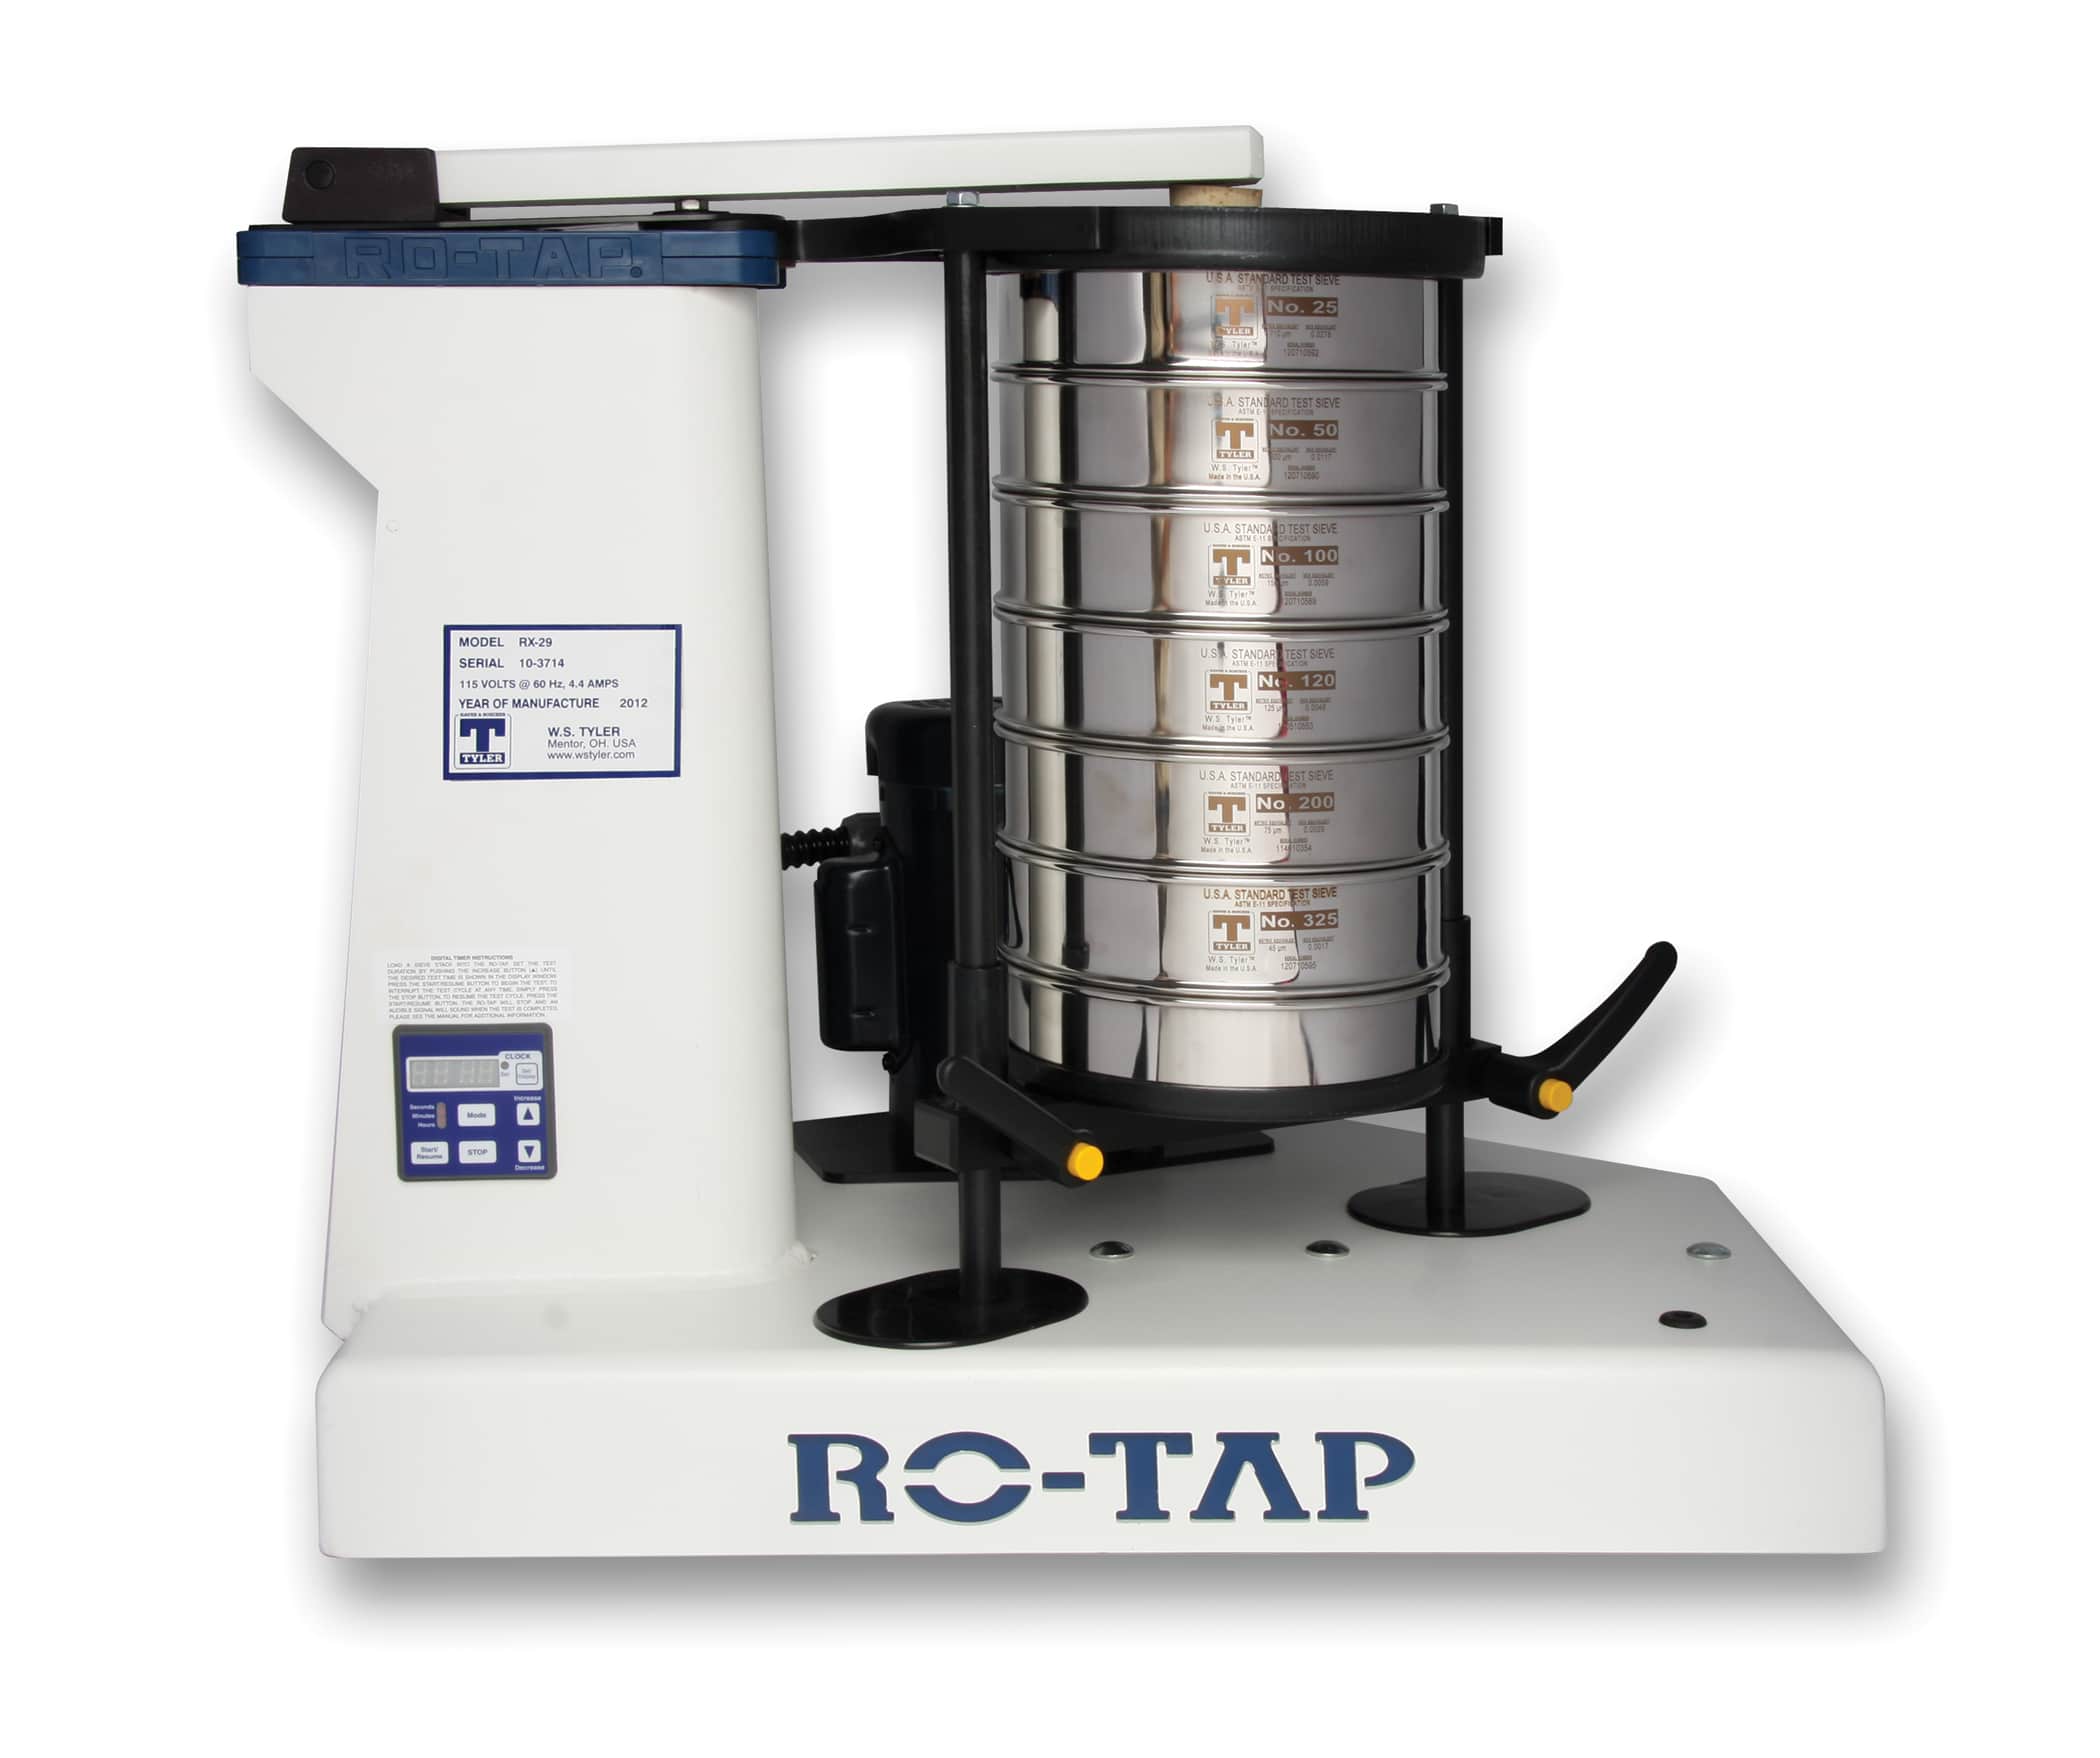 A Review of the RO-TAP® RX-29 Mechanical Sieve Shaker